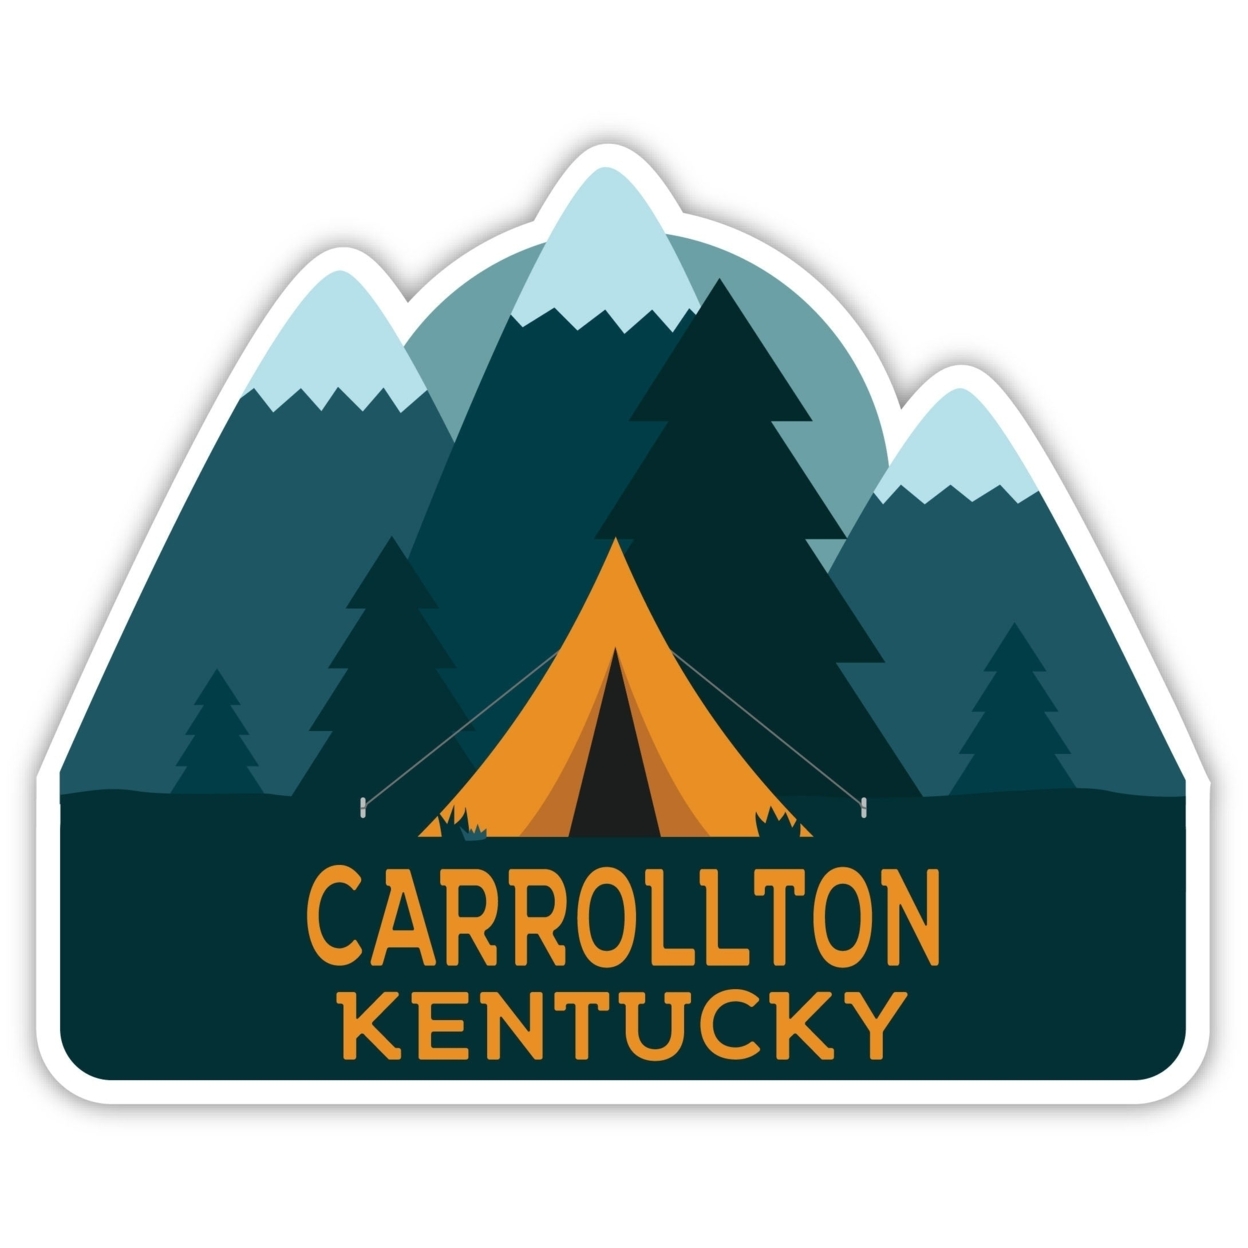 Carrollton Kentucky Souvenir Decorative Stickers (Choose Theme And Size) - 4-Pack, 2-Inch, Tent